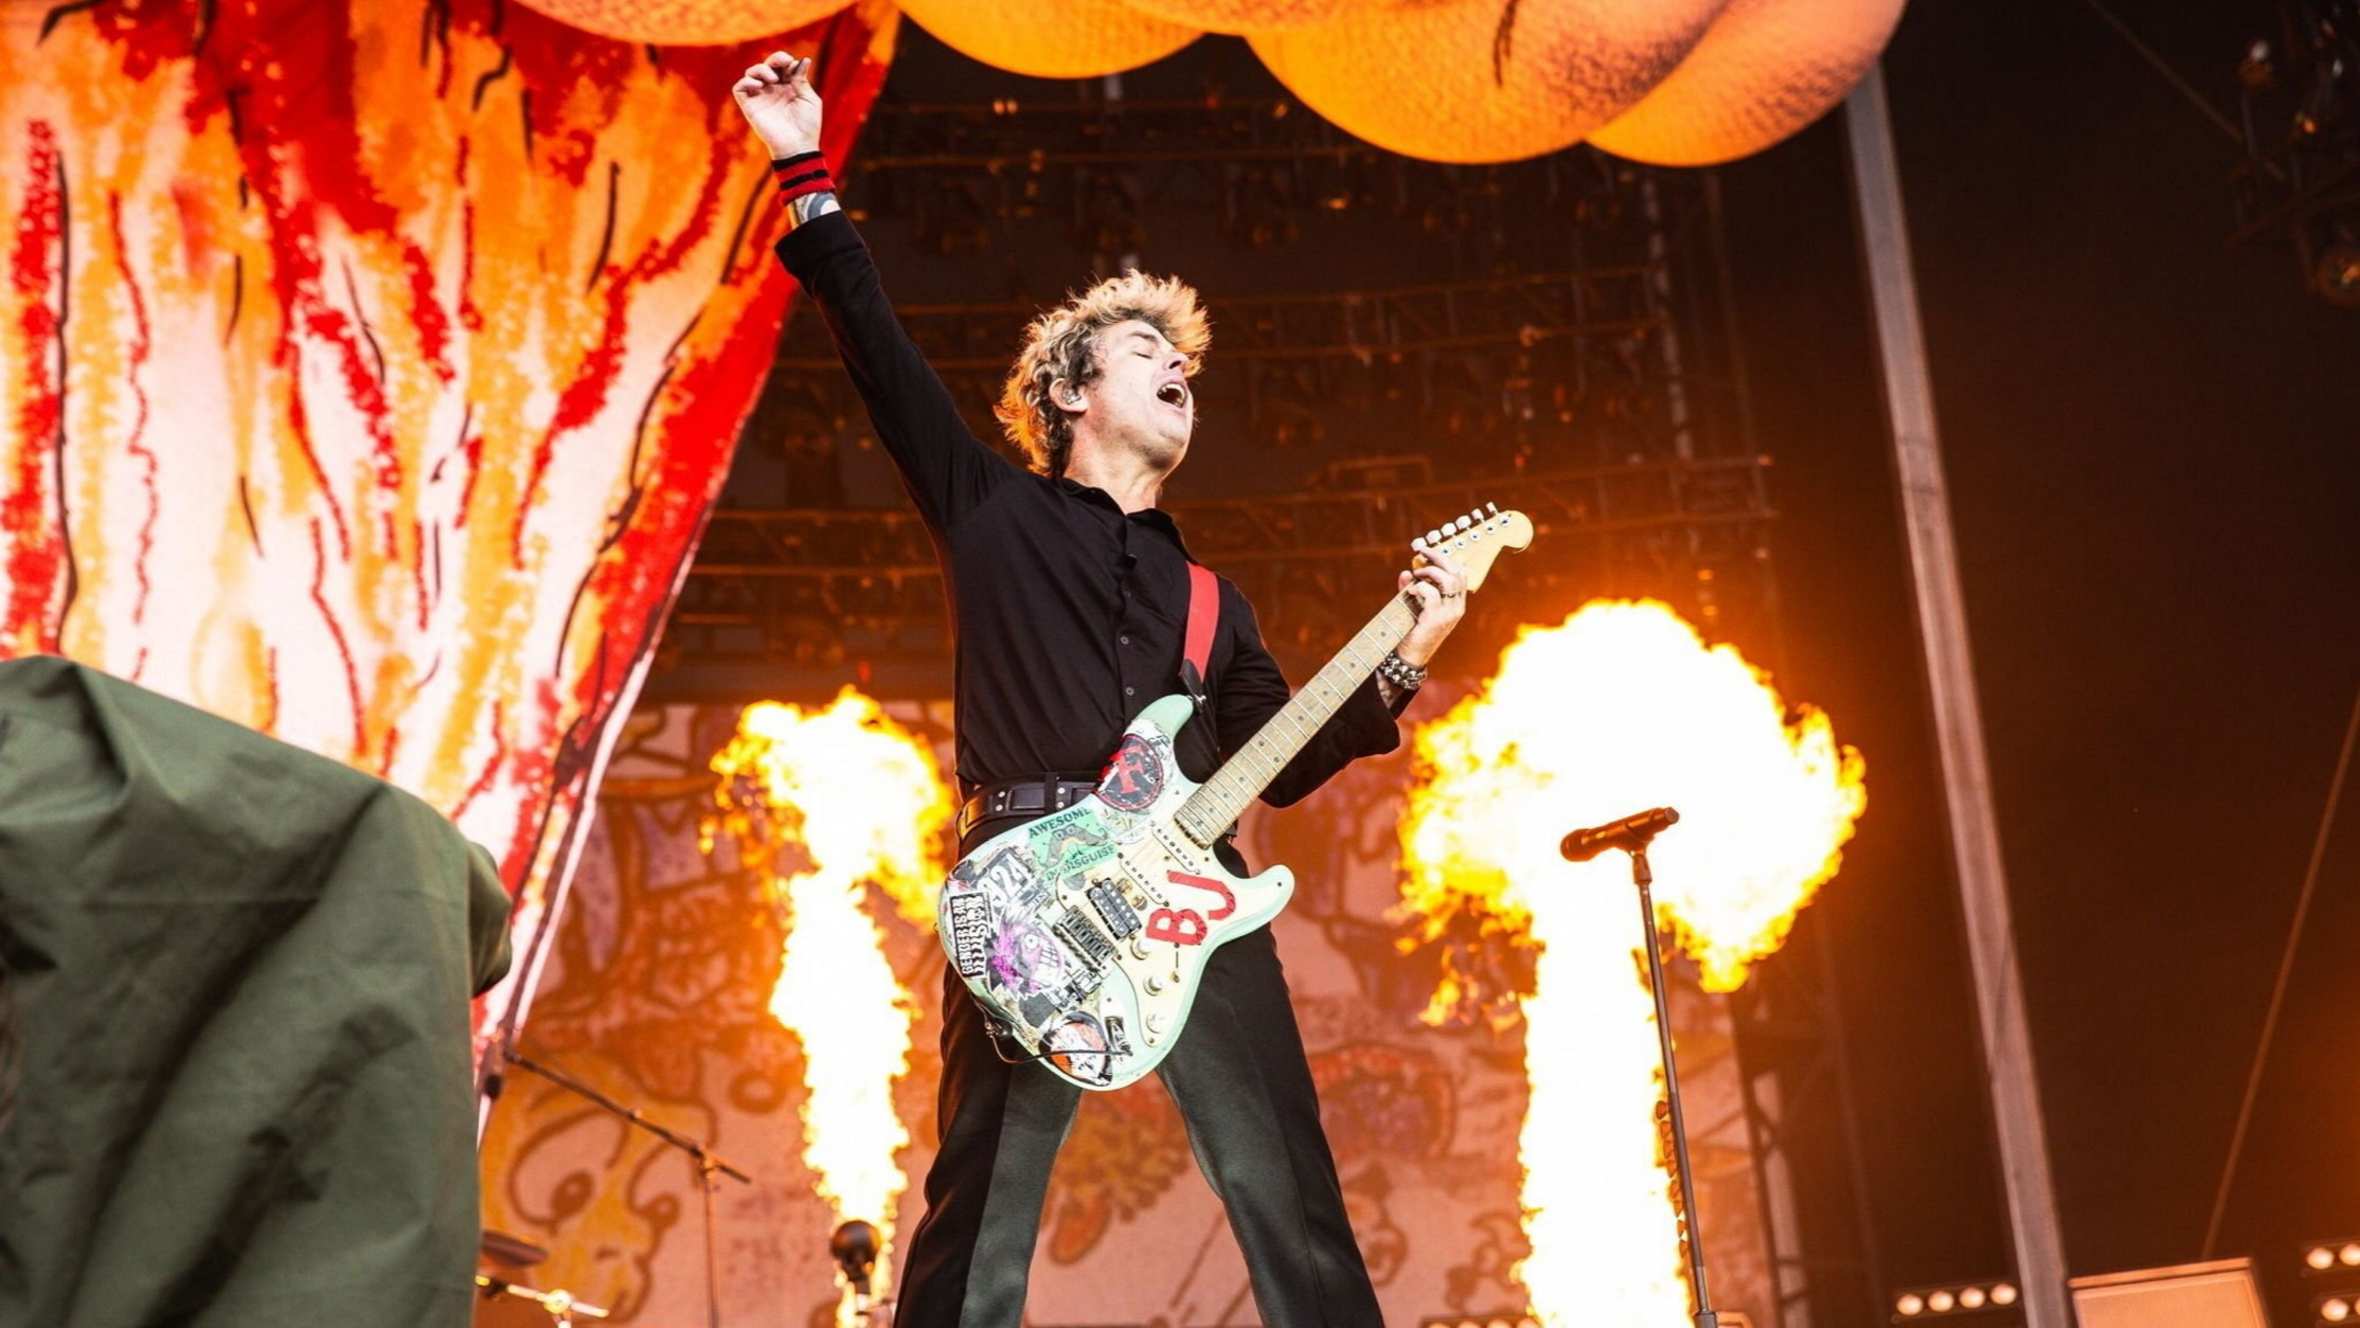 A short man with peroxided hair wearing black holds a guitar and raises one arm in triumph as firejets flame behind him